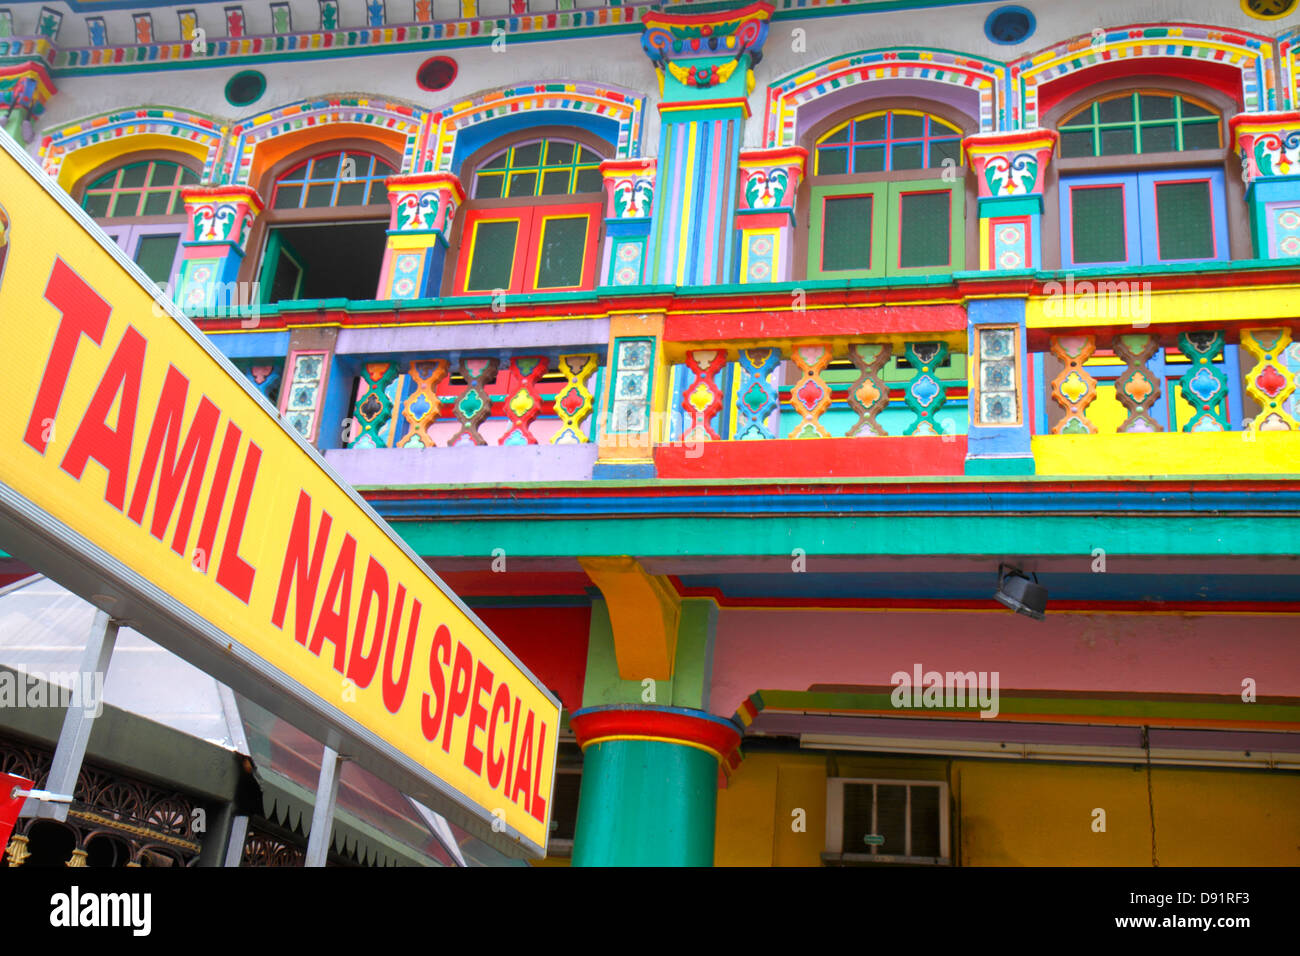 Singapore Little India,Kerbau Road,two-story,storey,shophouses,shophouse,colorful,sign,Tamil Nadu Special,Sing130206033 Stock Photo